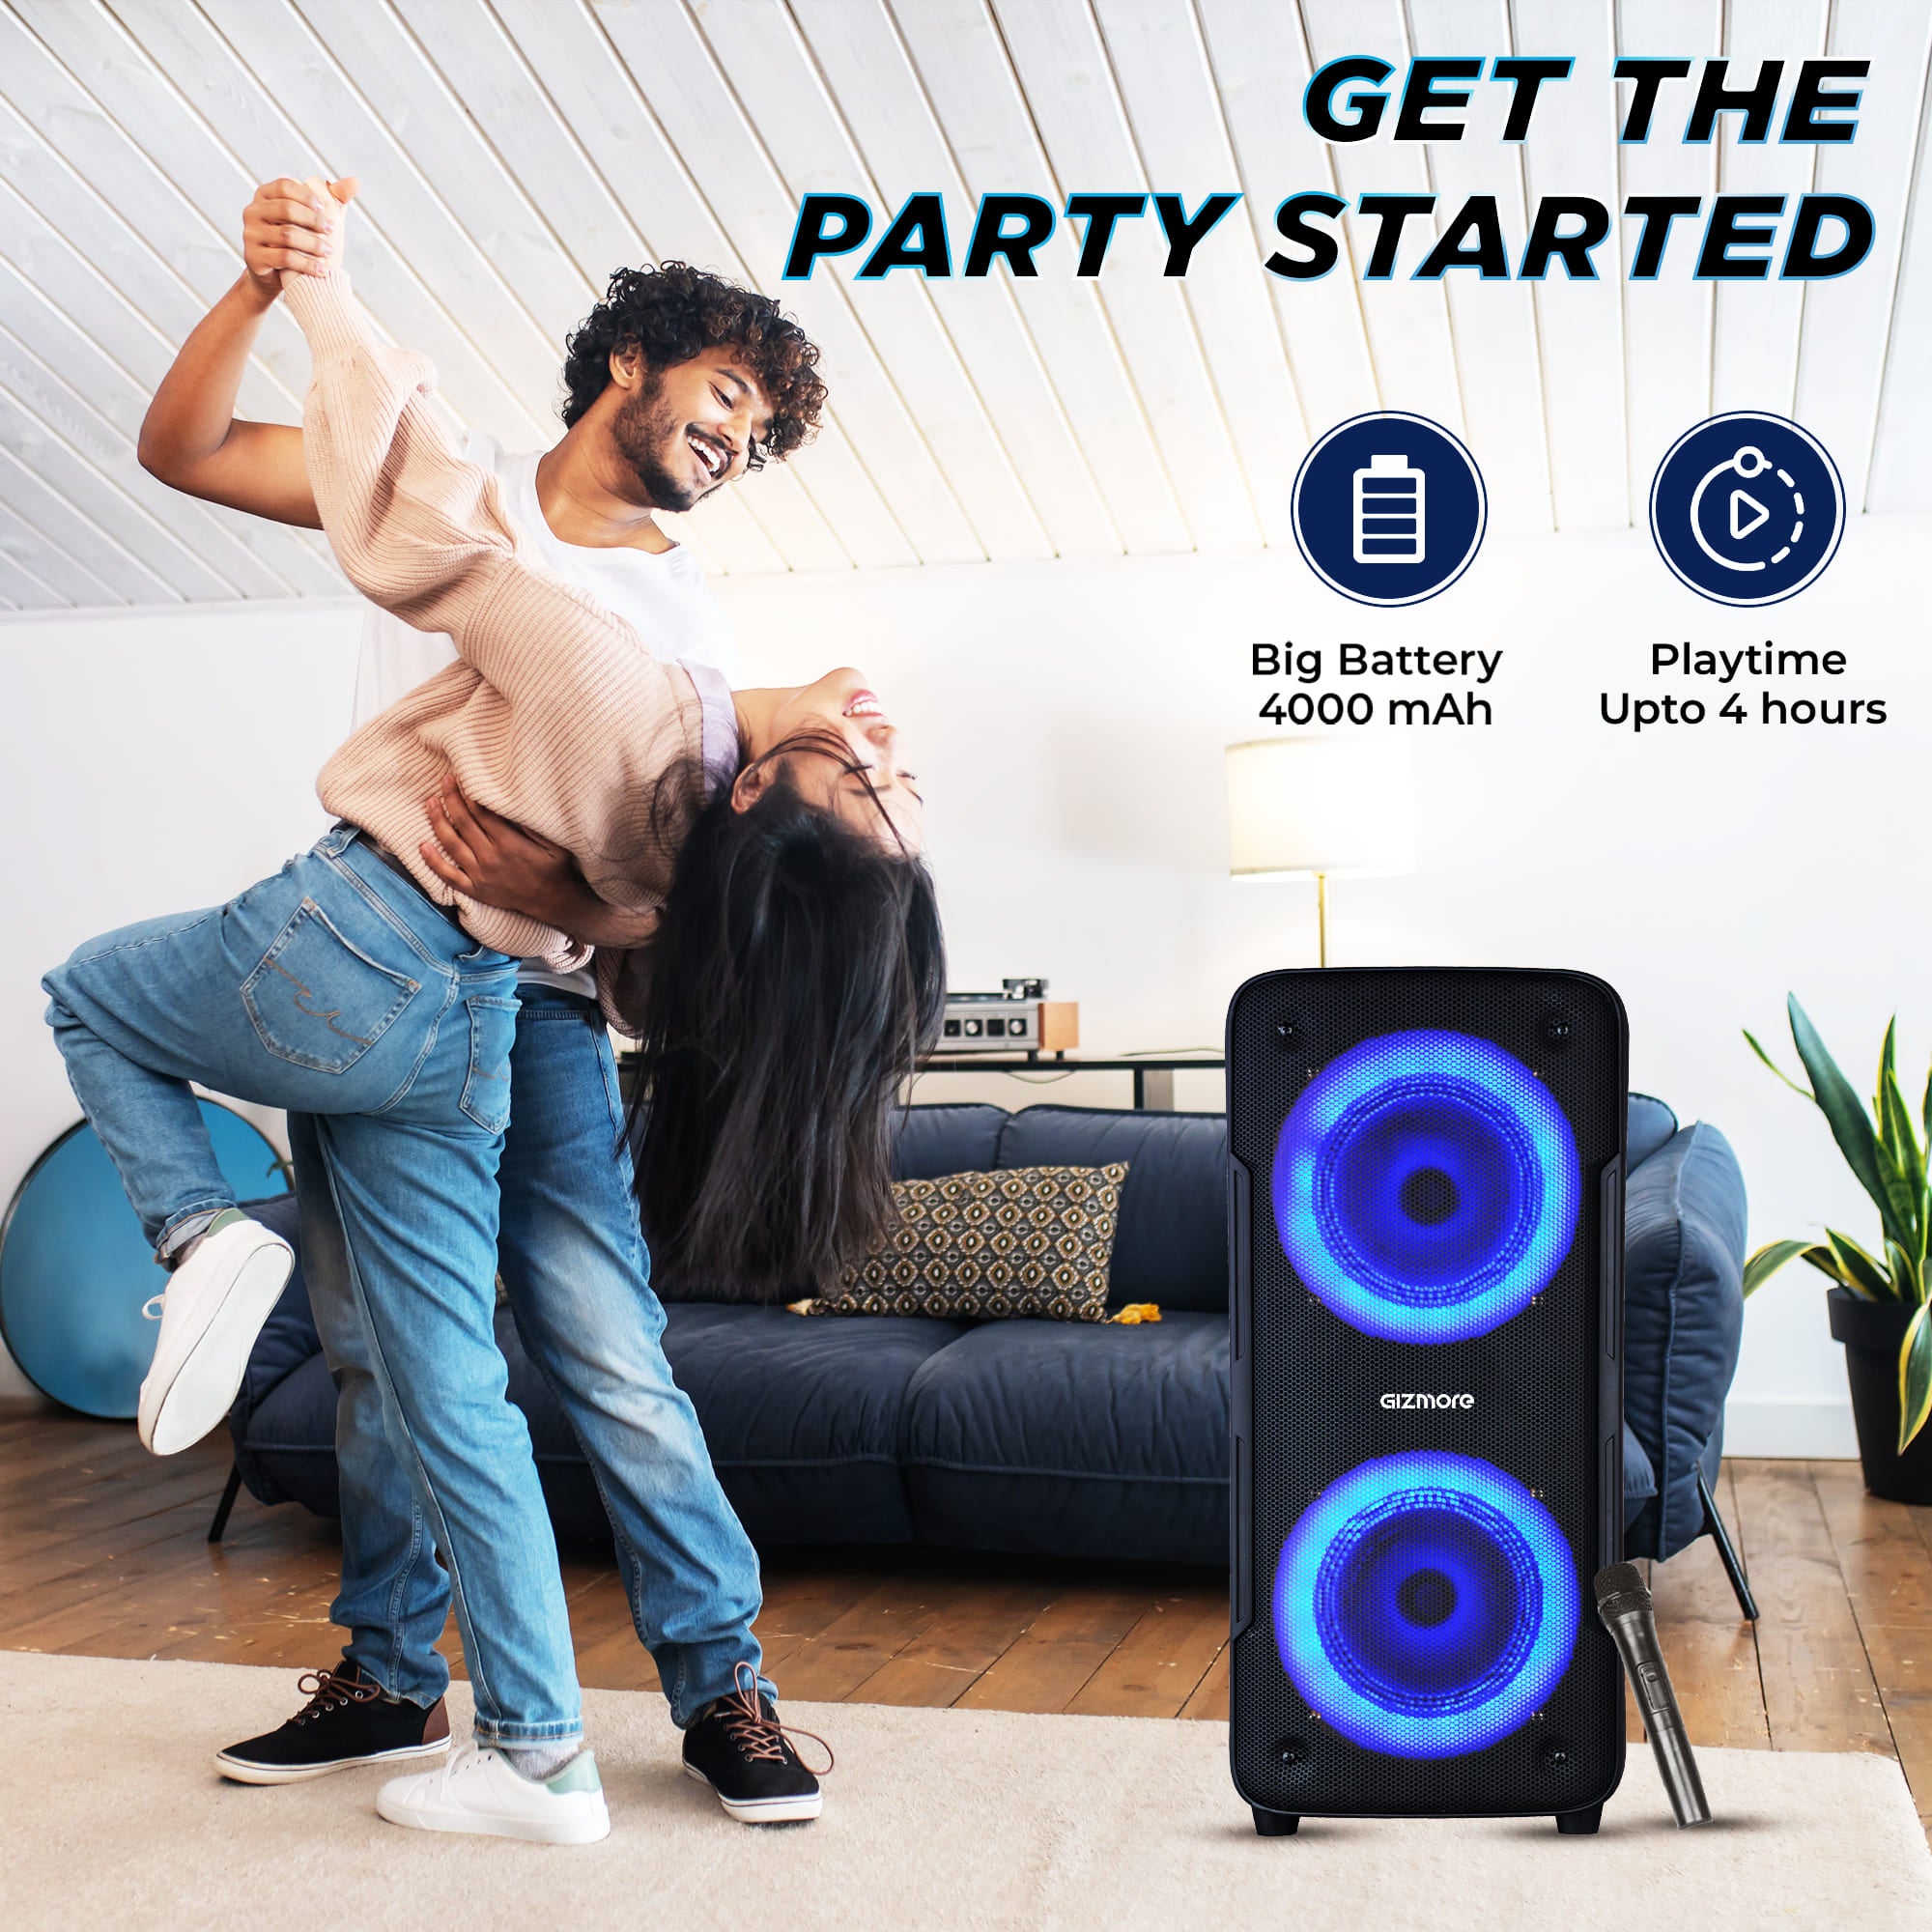 Gizmore 40Watt Wheelz T4000 Portable Party Speaker with Wireless Mic and TWS function